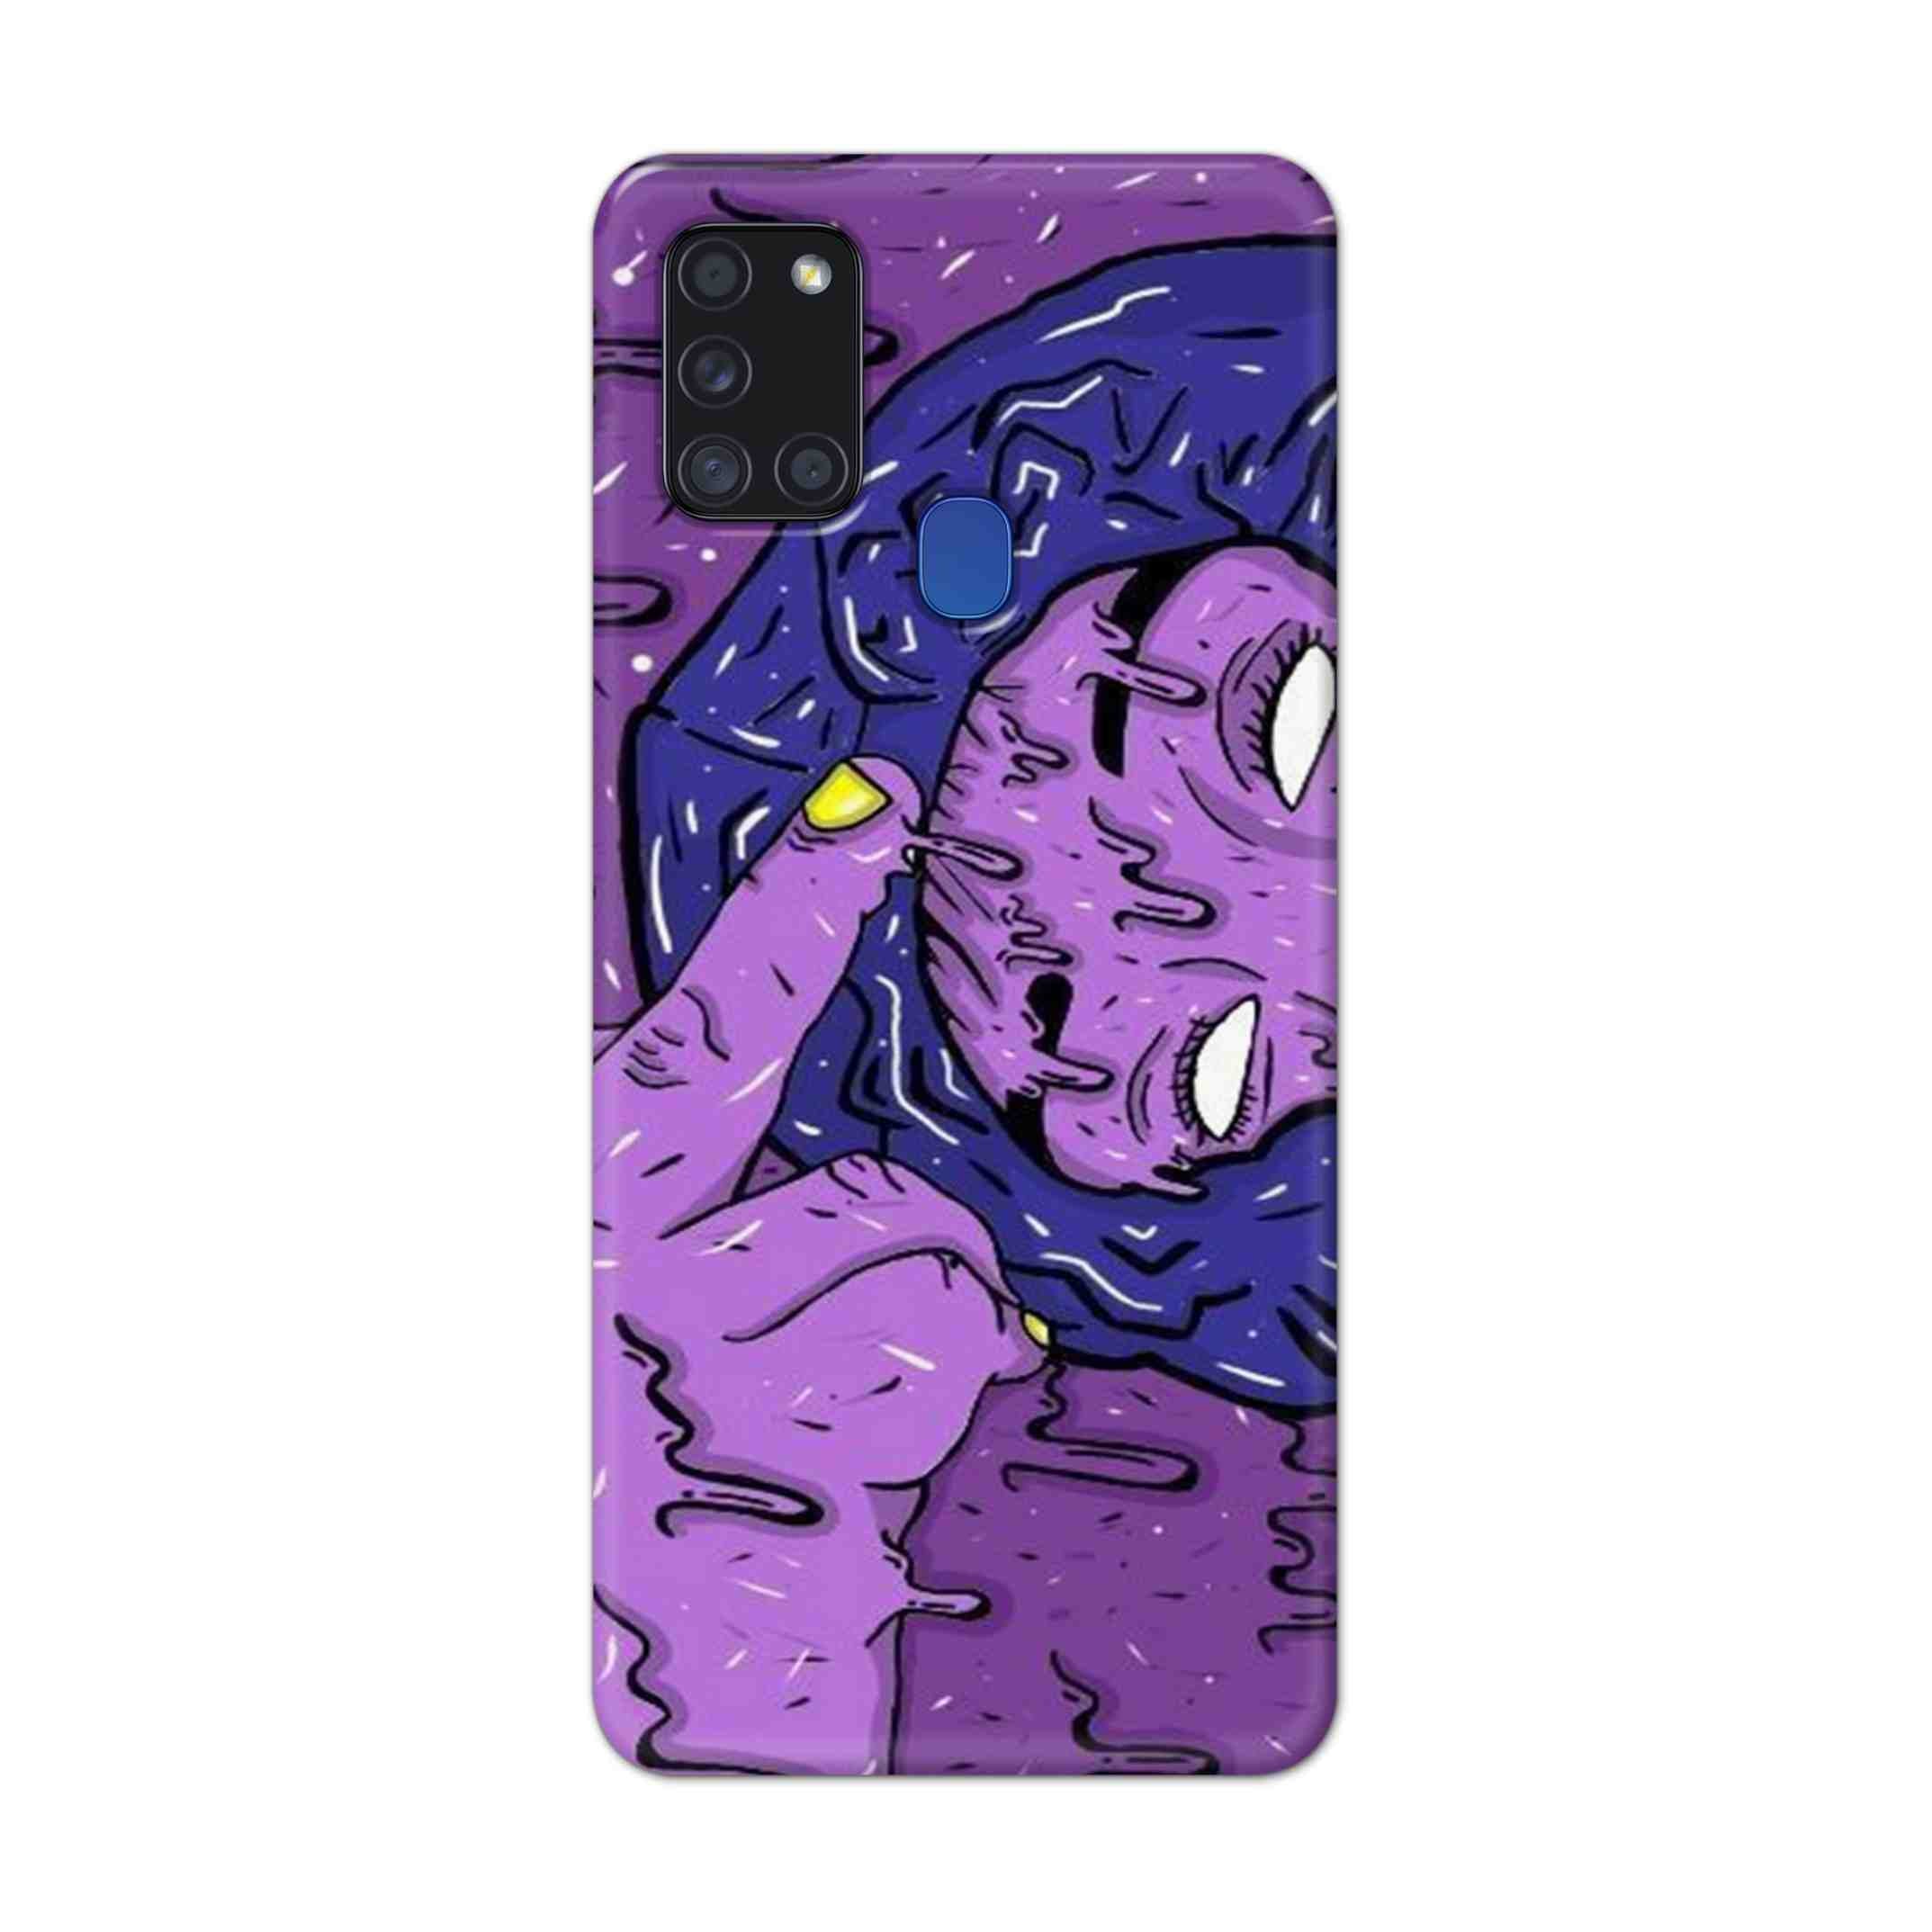 Buy Dashing Art Hard Back Mobile Phone Case Cover For Samsung Galaxy A21s Online